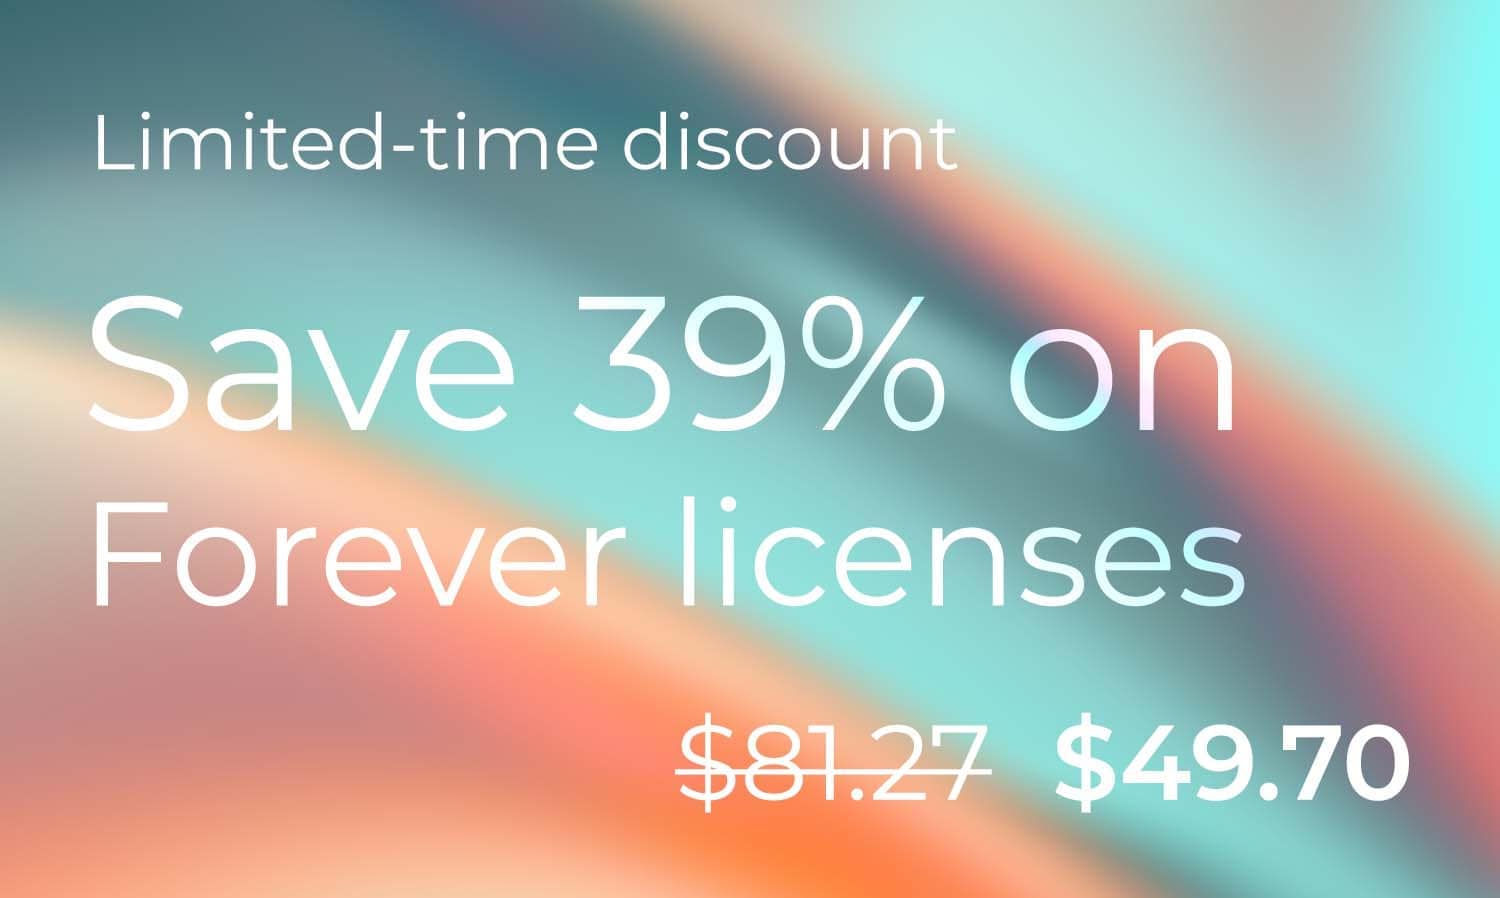 Limited time discount: 39% off on forever licenses